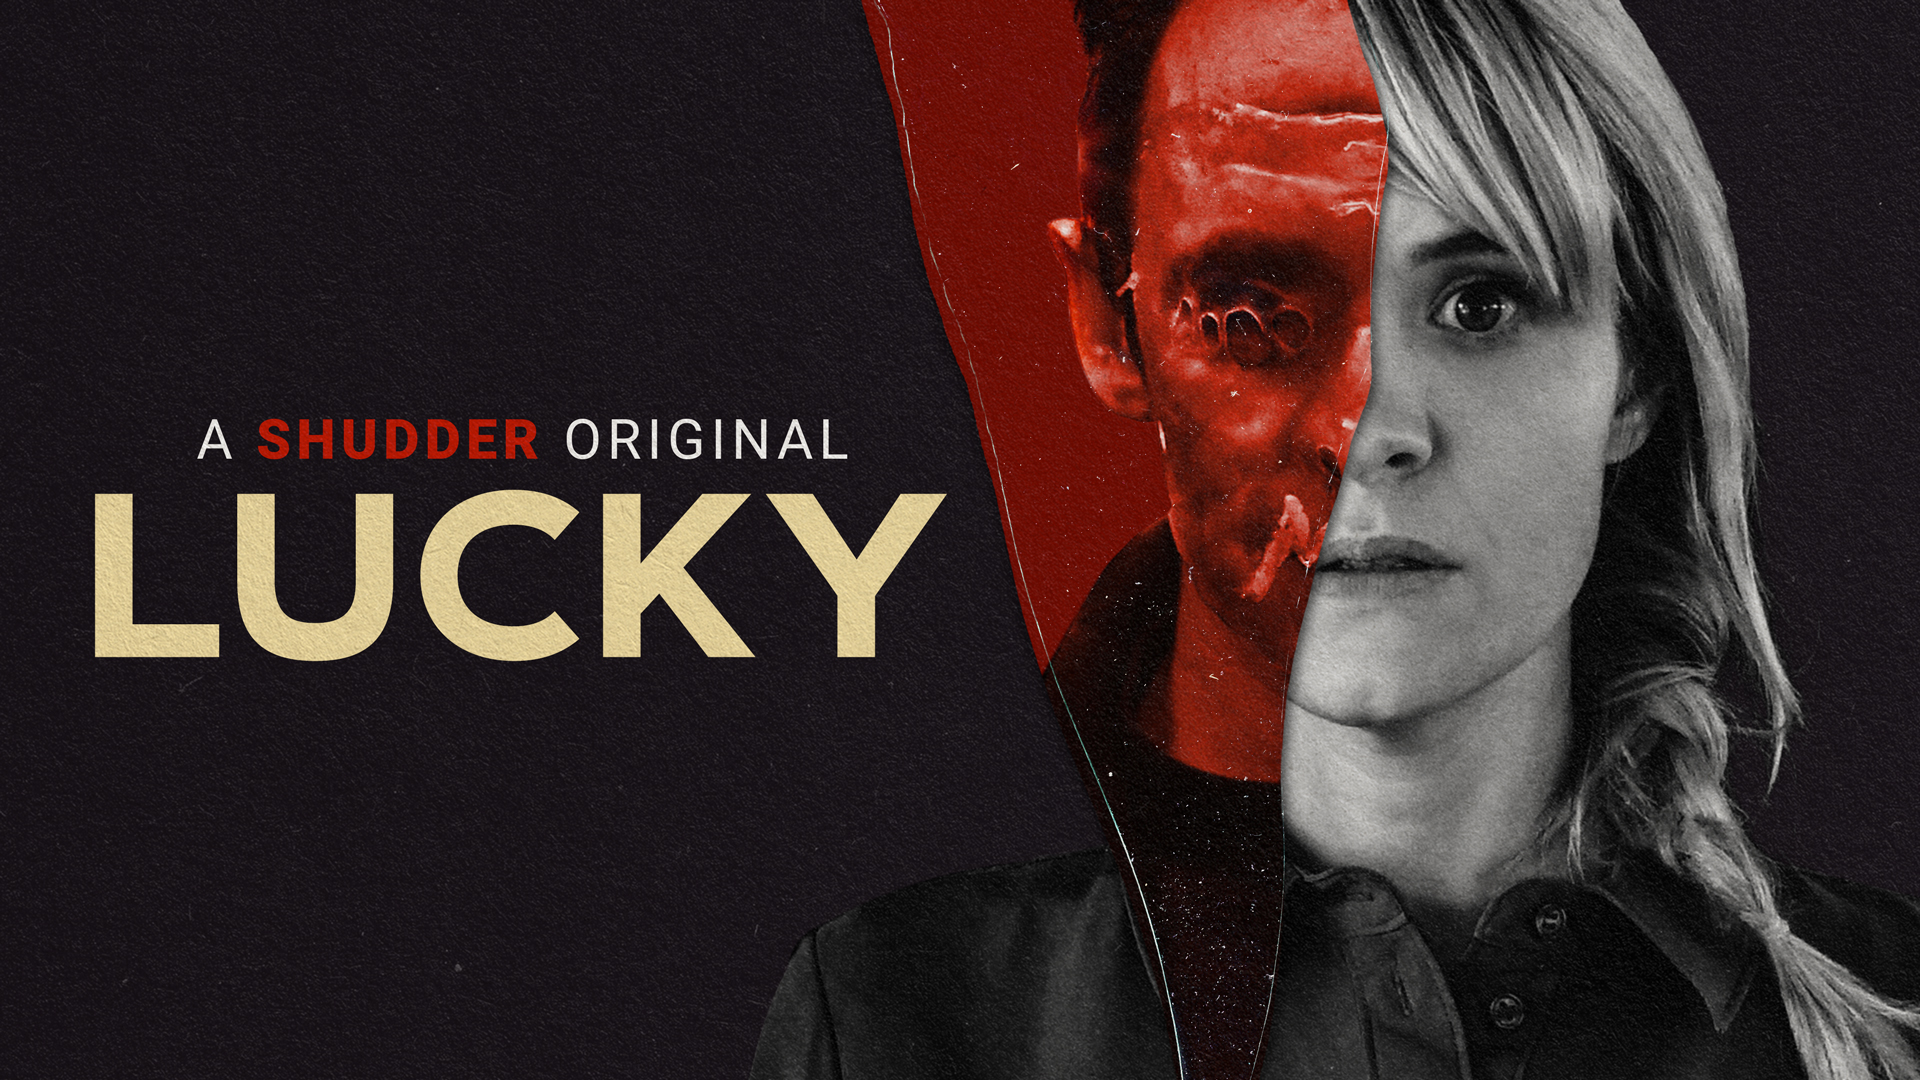 Writer And Star Brea Grant And Director Natasha Kermani Talk About Their New Horror/Thriller Lucky [Exclusive Interview]